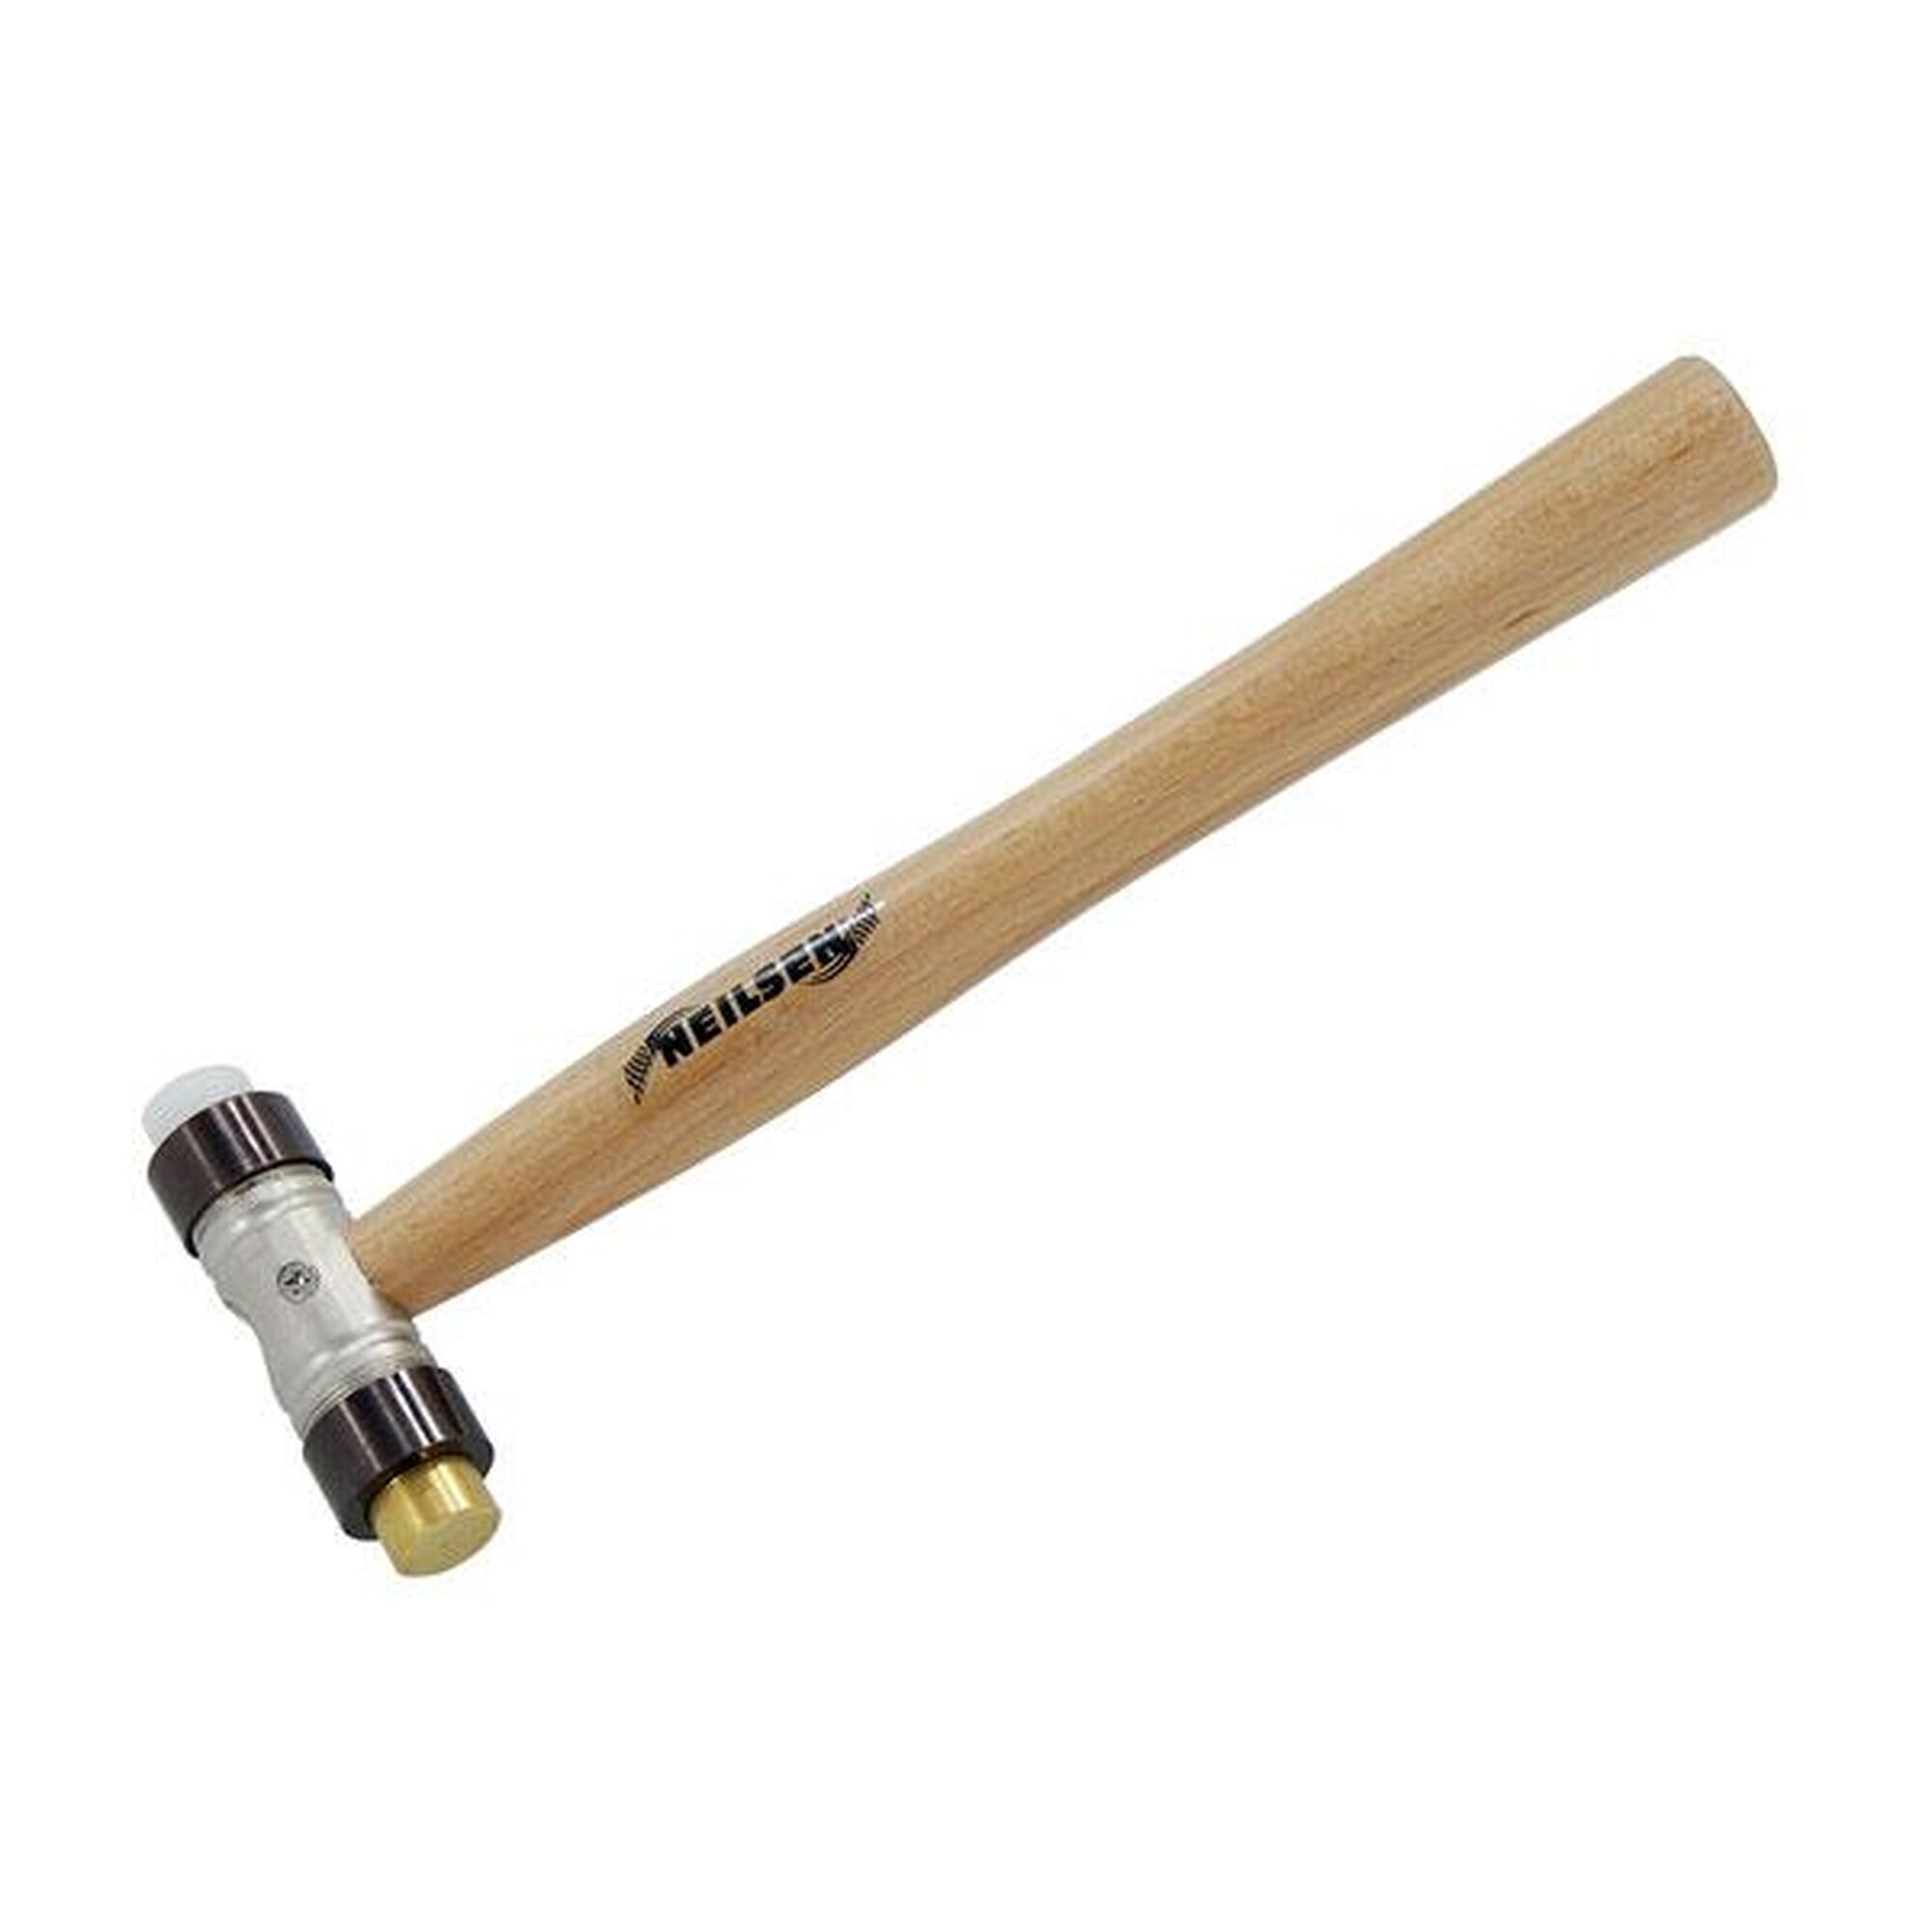 Brass and Nylon Hammer With Detachable Face 37-395 